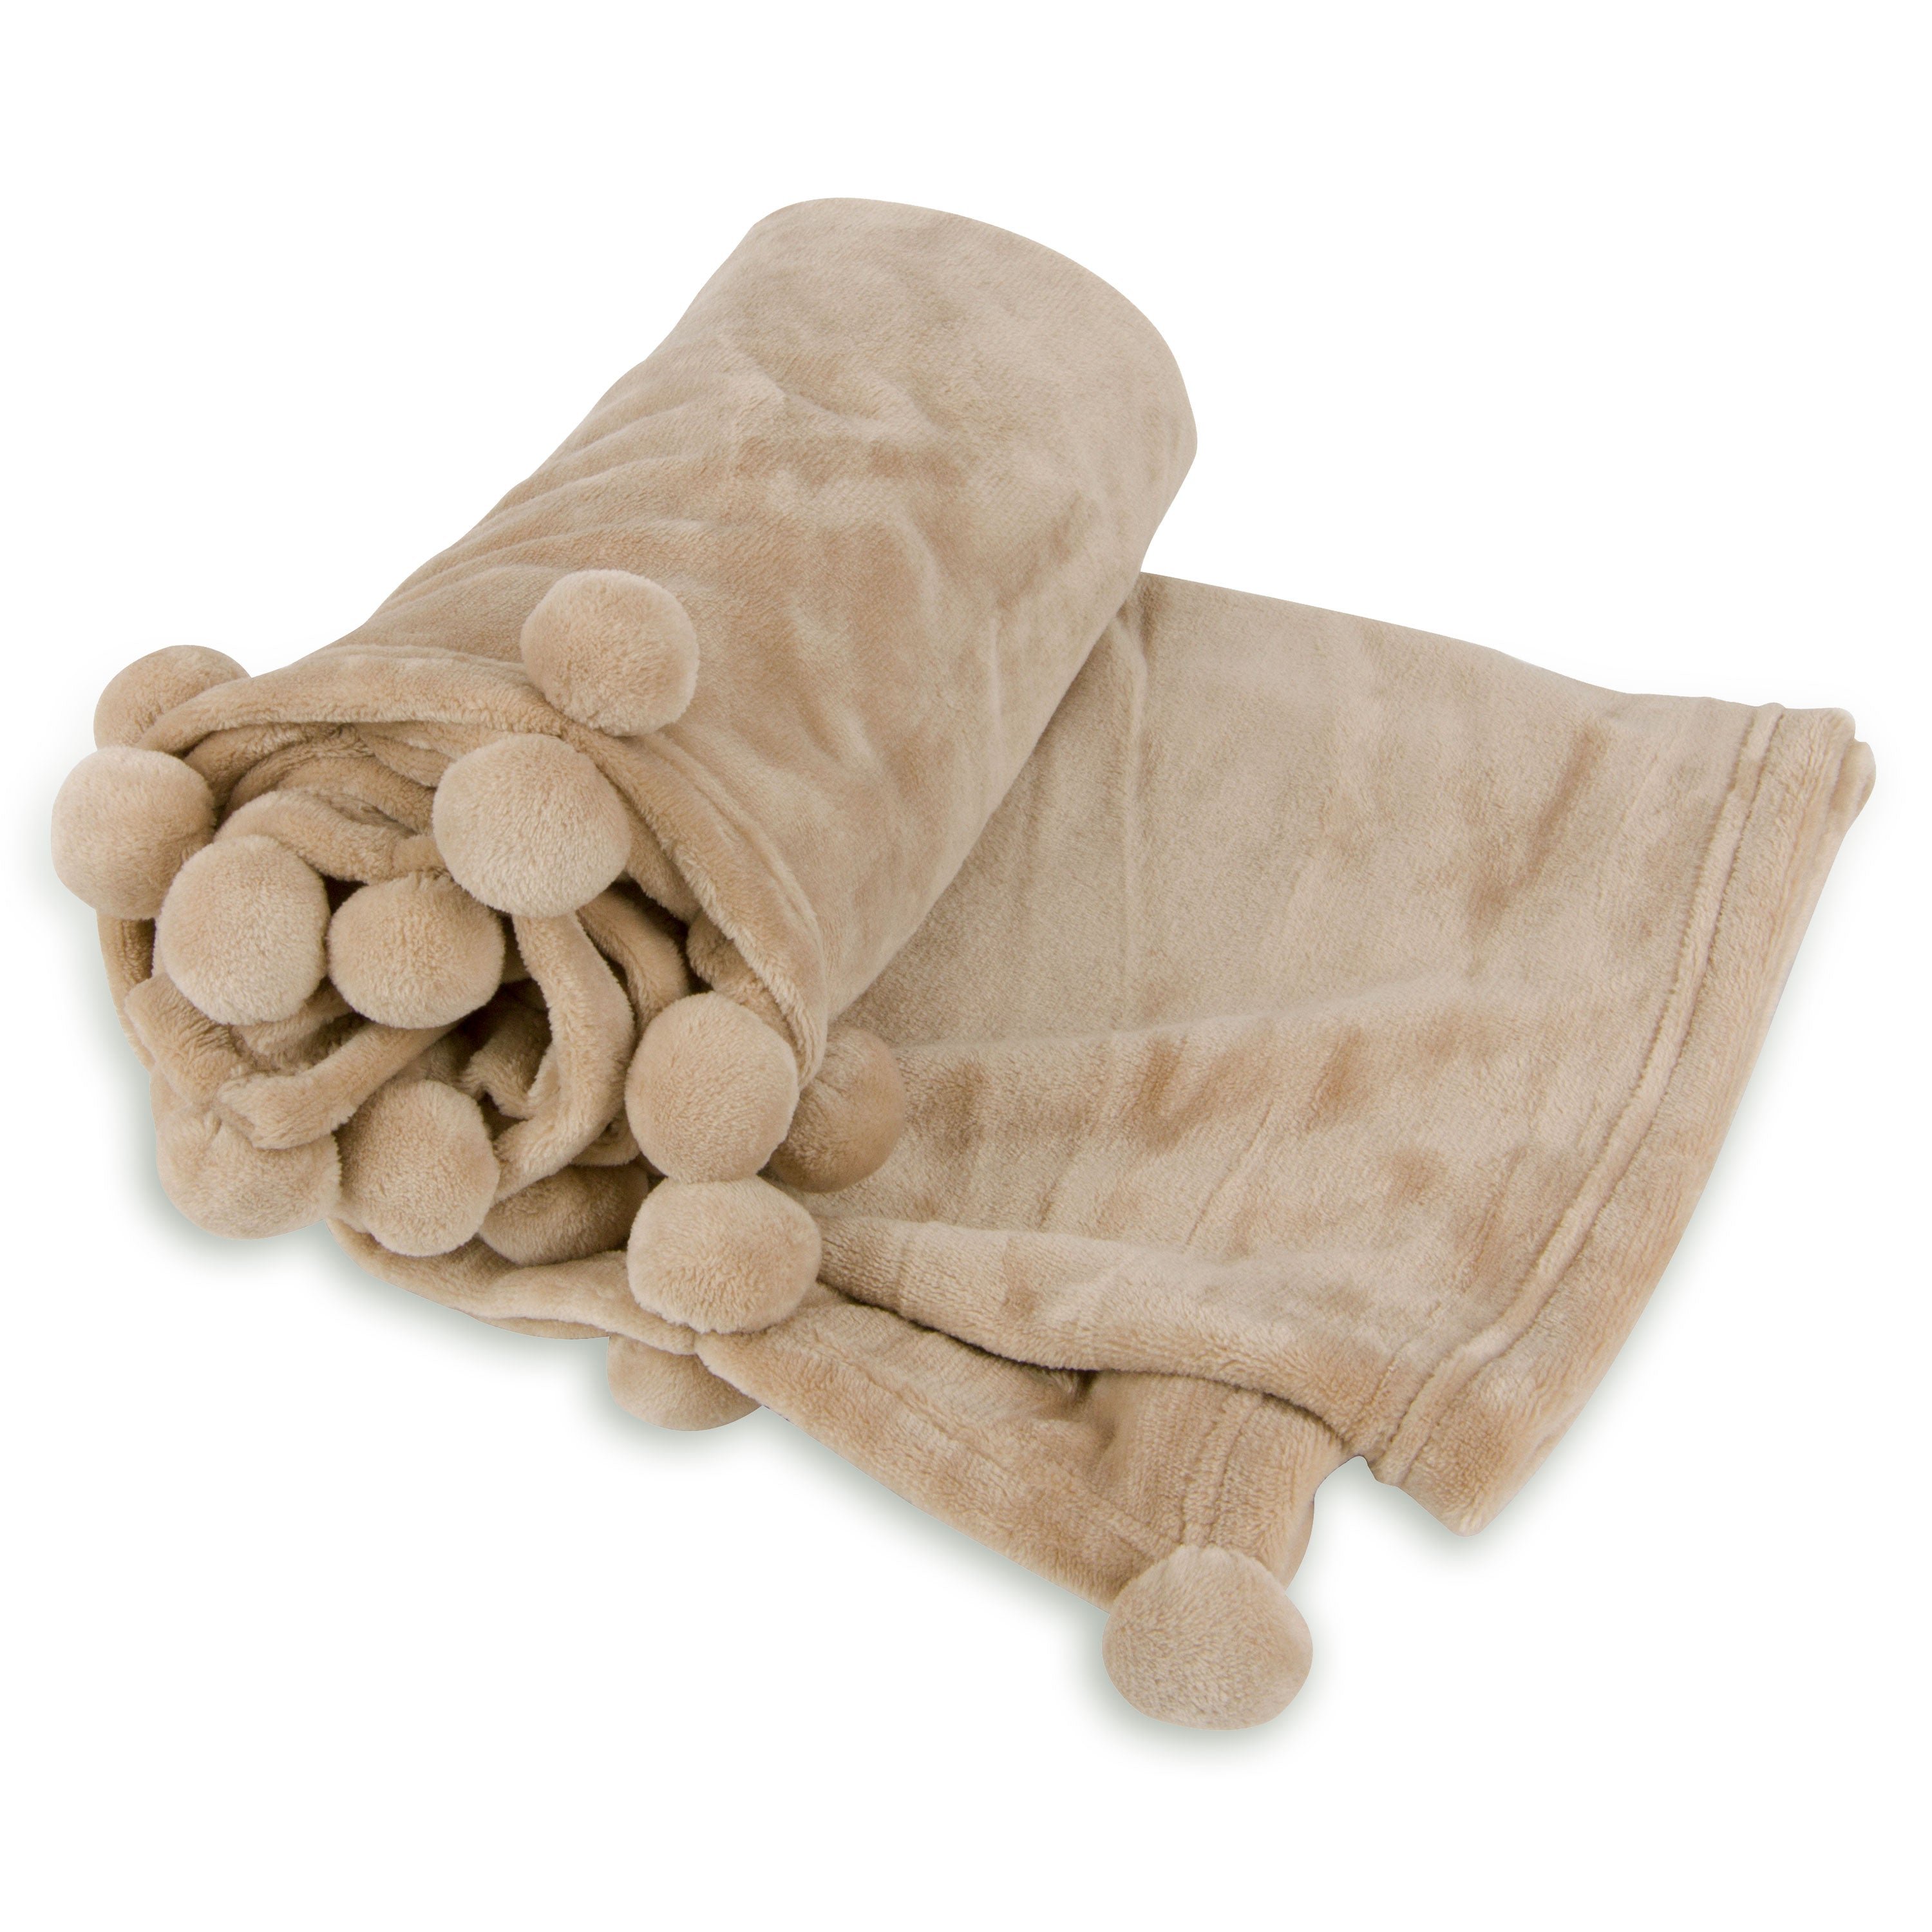 Cheer Collection Pom Pom Flannel Blanket | Ultra Soft On Skin, Lightweight Bed Or Couch Throw Blanke In Brown